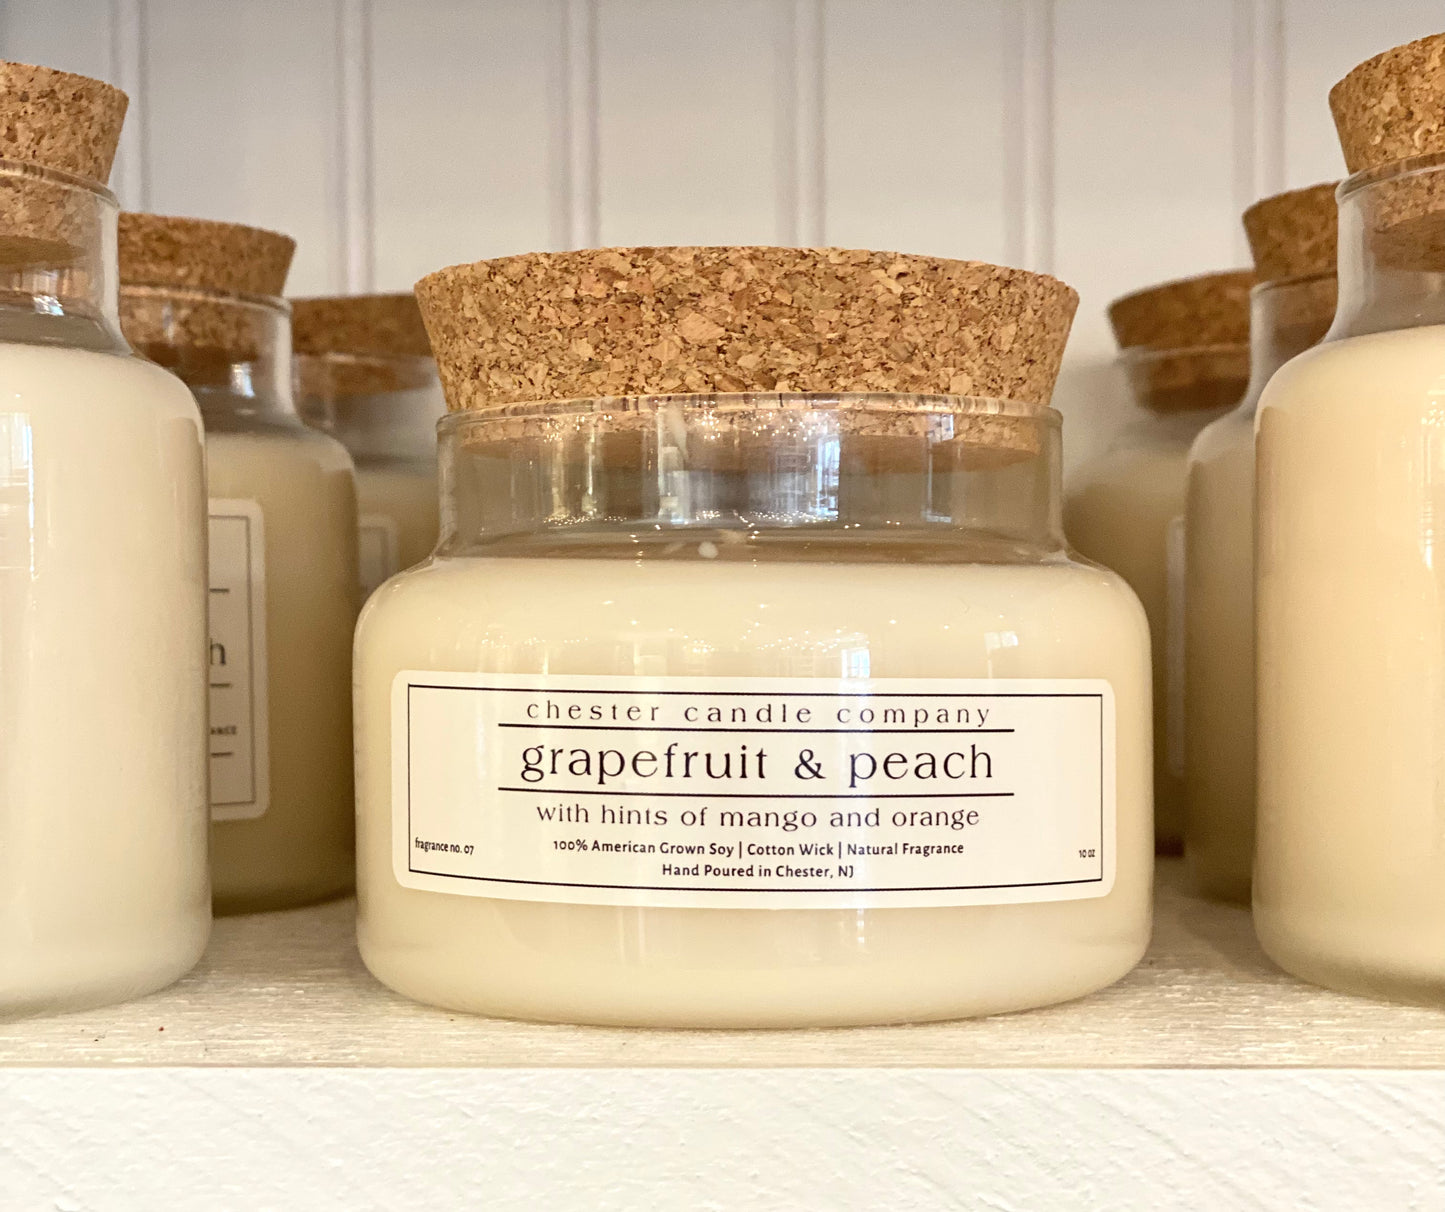 Natural Soy Wax Candle in a Clear Glass Apothecary-Style Jar and a Cork Lid. White Label on the Jar Reads "chester candle company. Grapefruit & peach with hints of mango and orange. 100% American Grown Soy, Cotton Wick, Natural Fragrance. Fragrance No. 07 Hand Poured in Chester, NJ. 10oz”